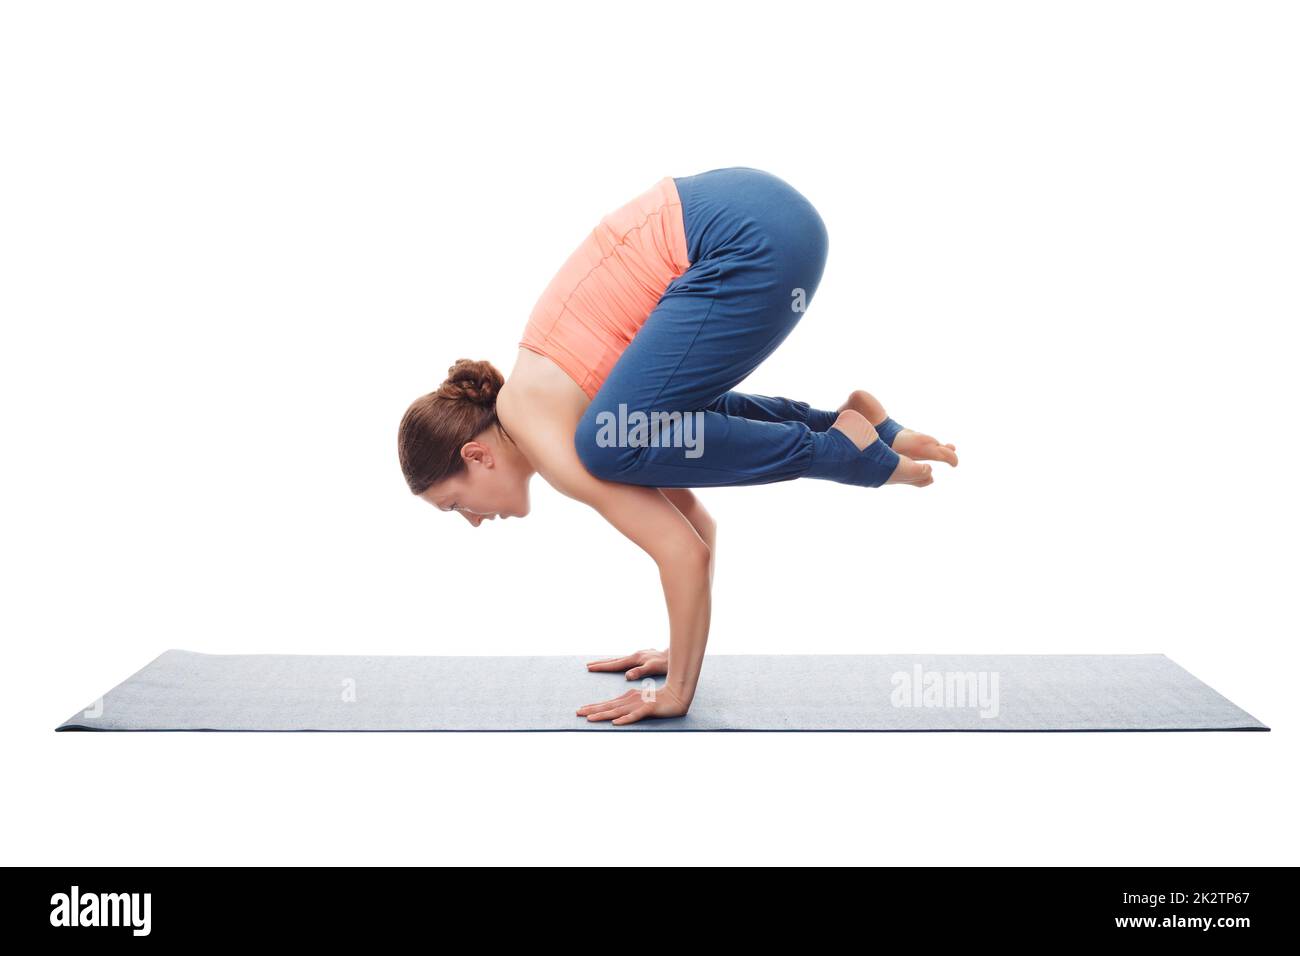 Woman exercise yoga arm balance Cut Out Stock Images & Pictures